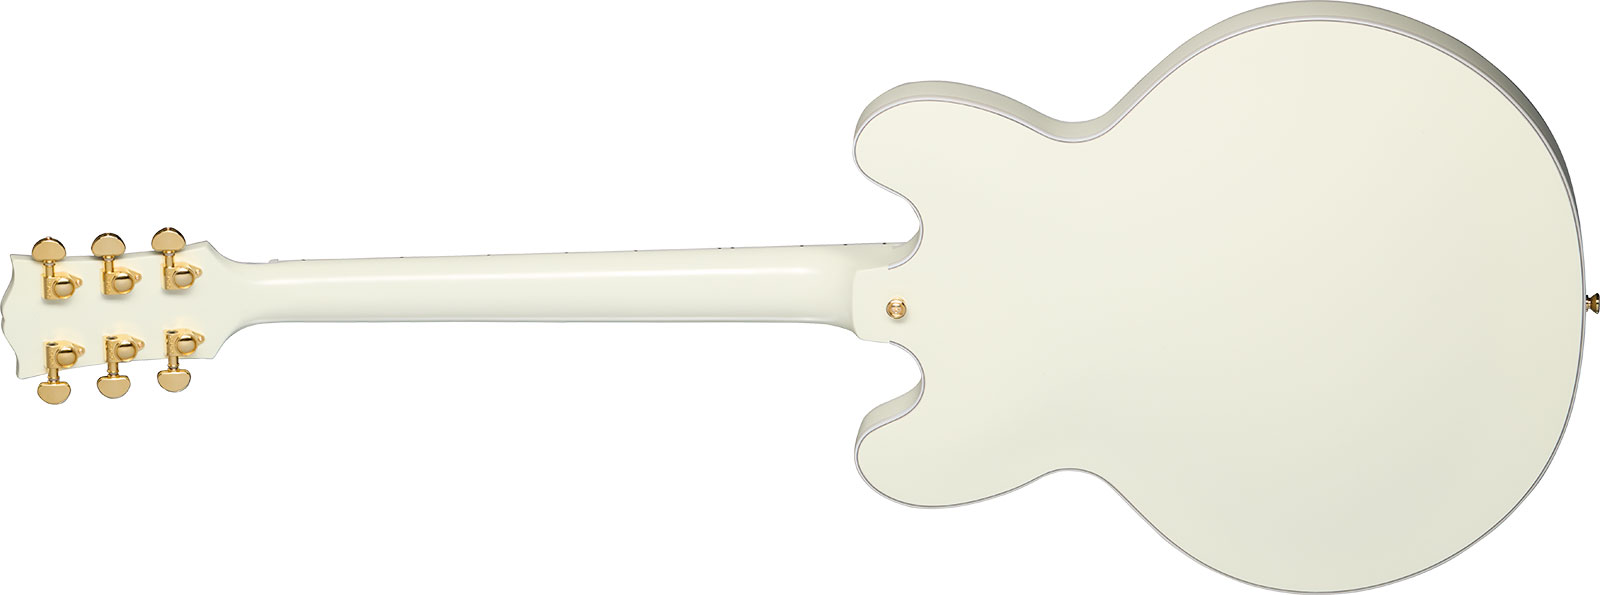 Epiphone Es355 1959 Inspired By 2h Gibson Ht Eb - Vos Classic White - Guitare Électrique 1/2 Caisse - Variation 1